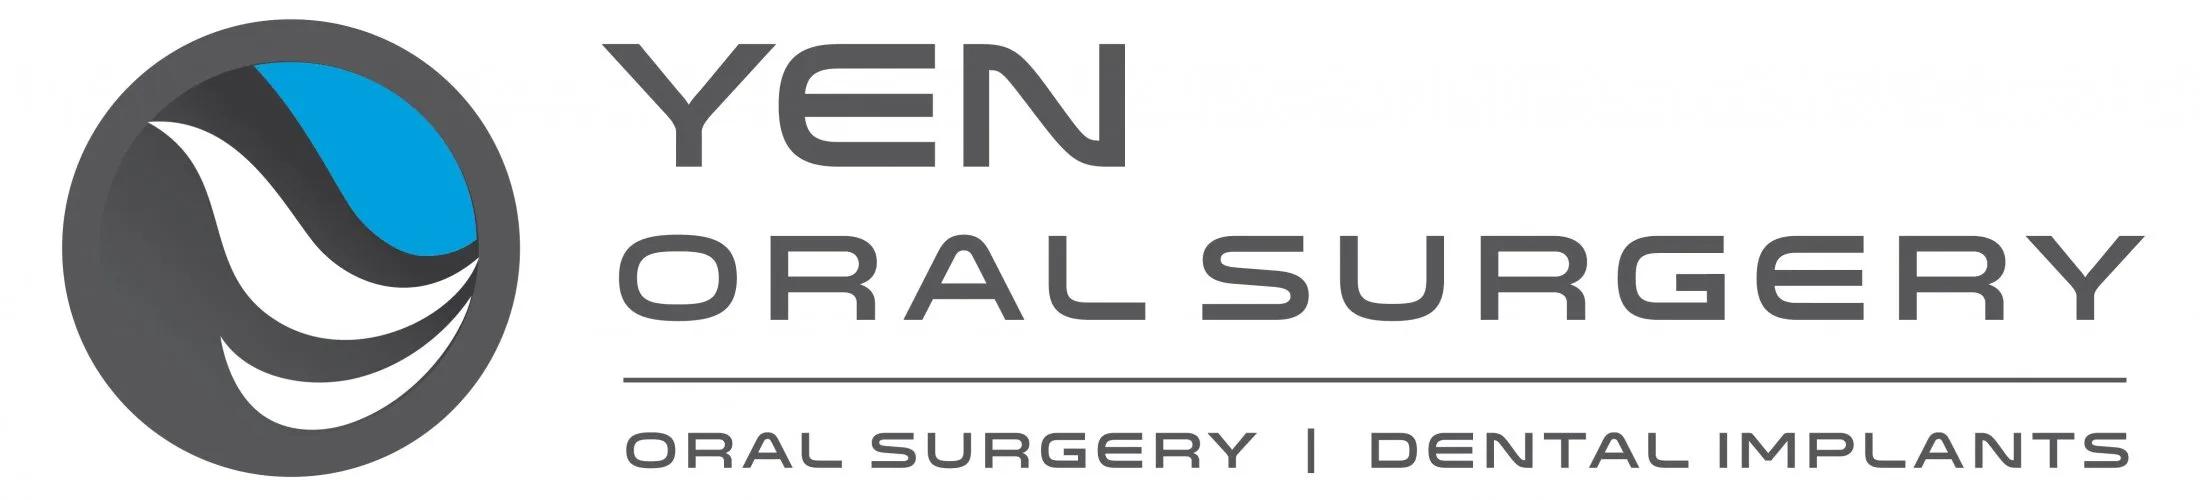 Link to Yen Oral Surgery home page